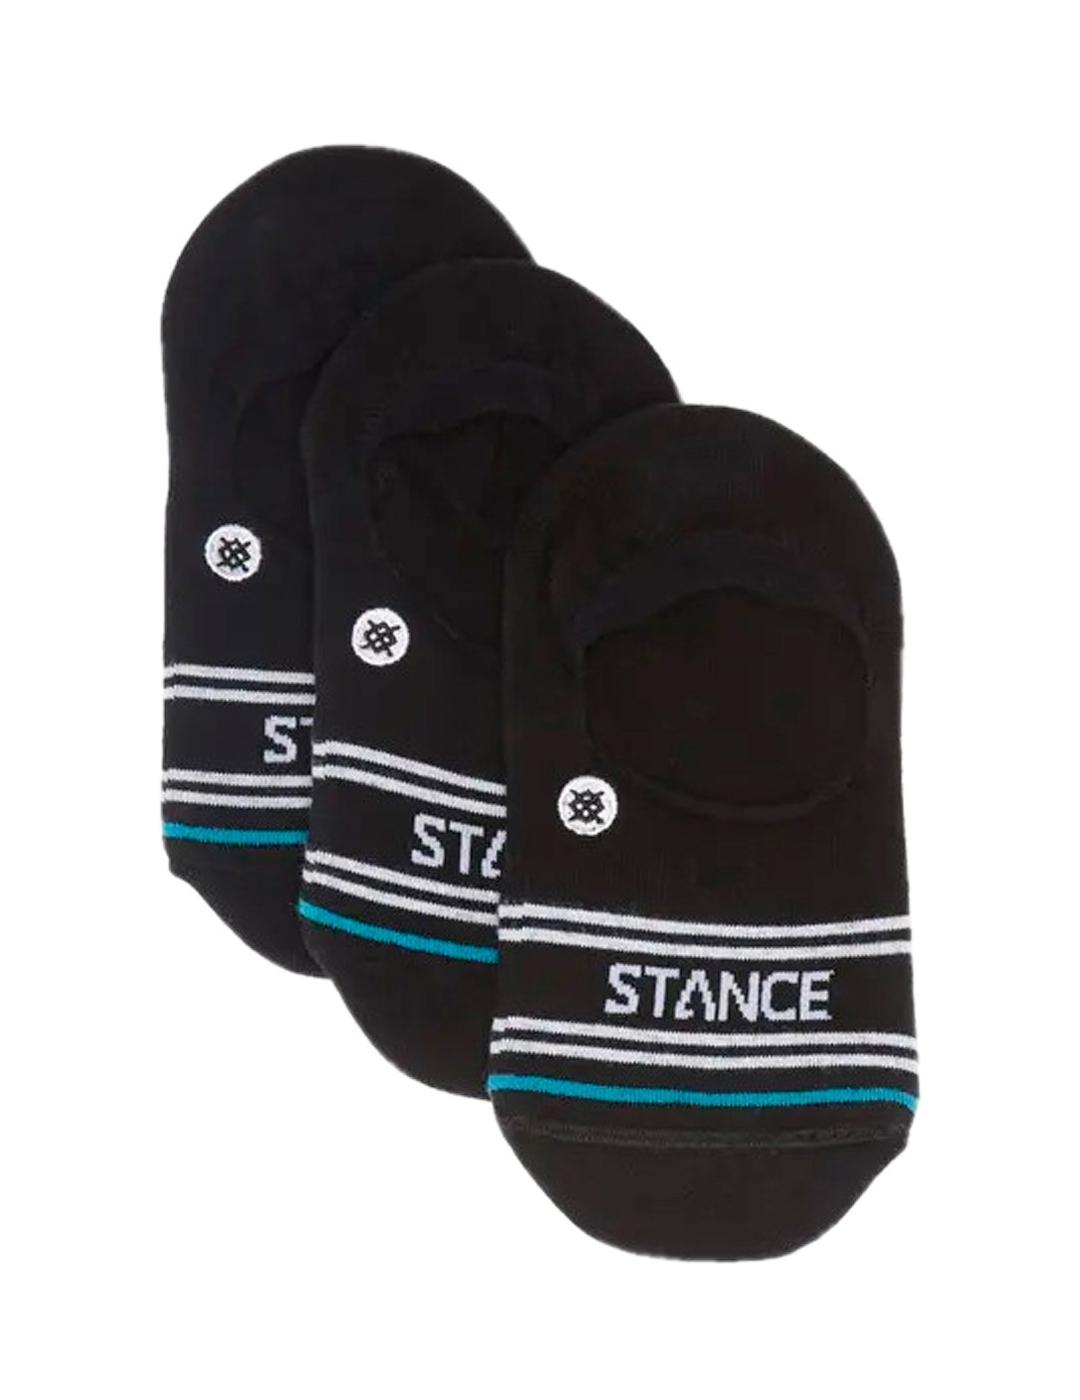 CALCETIN STANCE BASIC 3 PACK NO SHOW, NEGRO